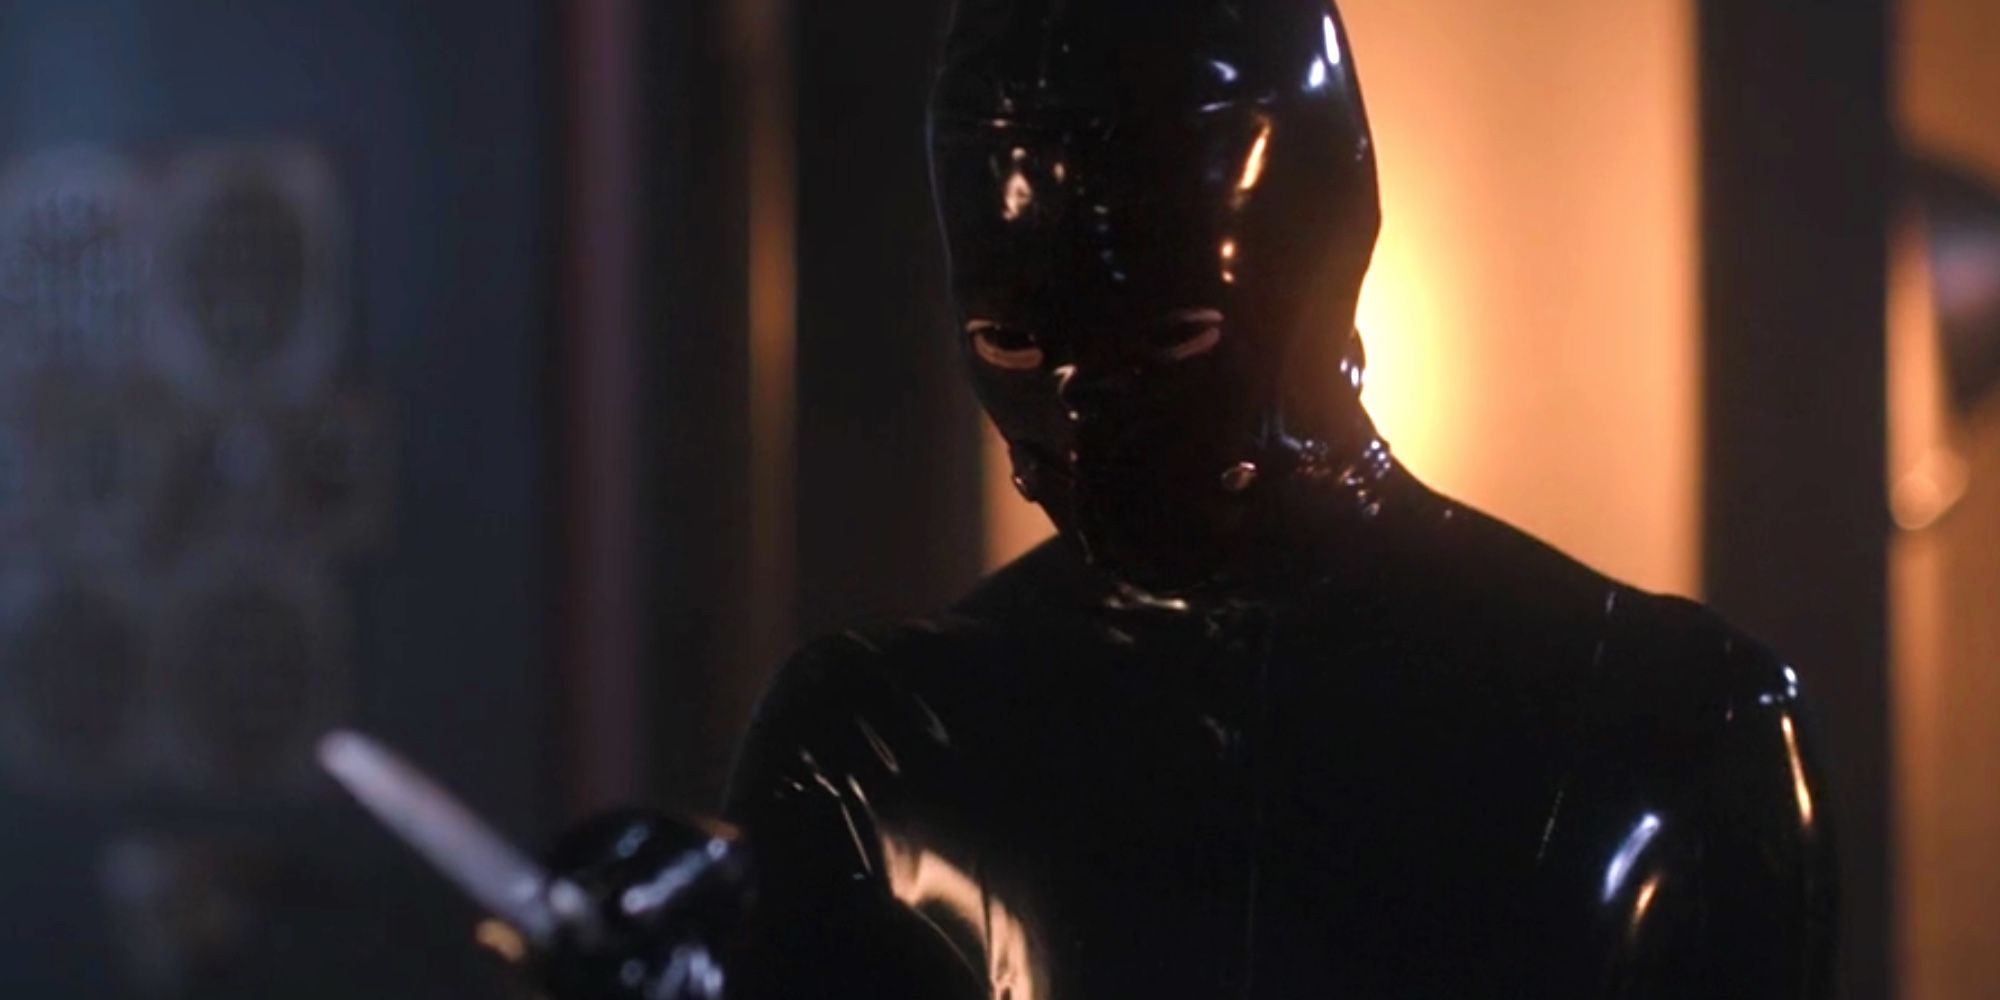 The Rubber Woman as seen in American Horror Stories